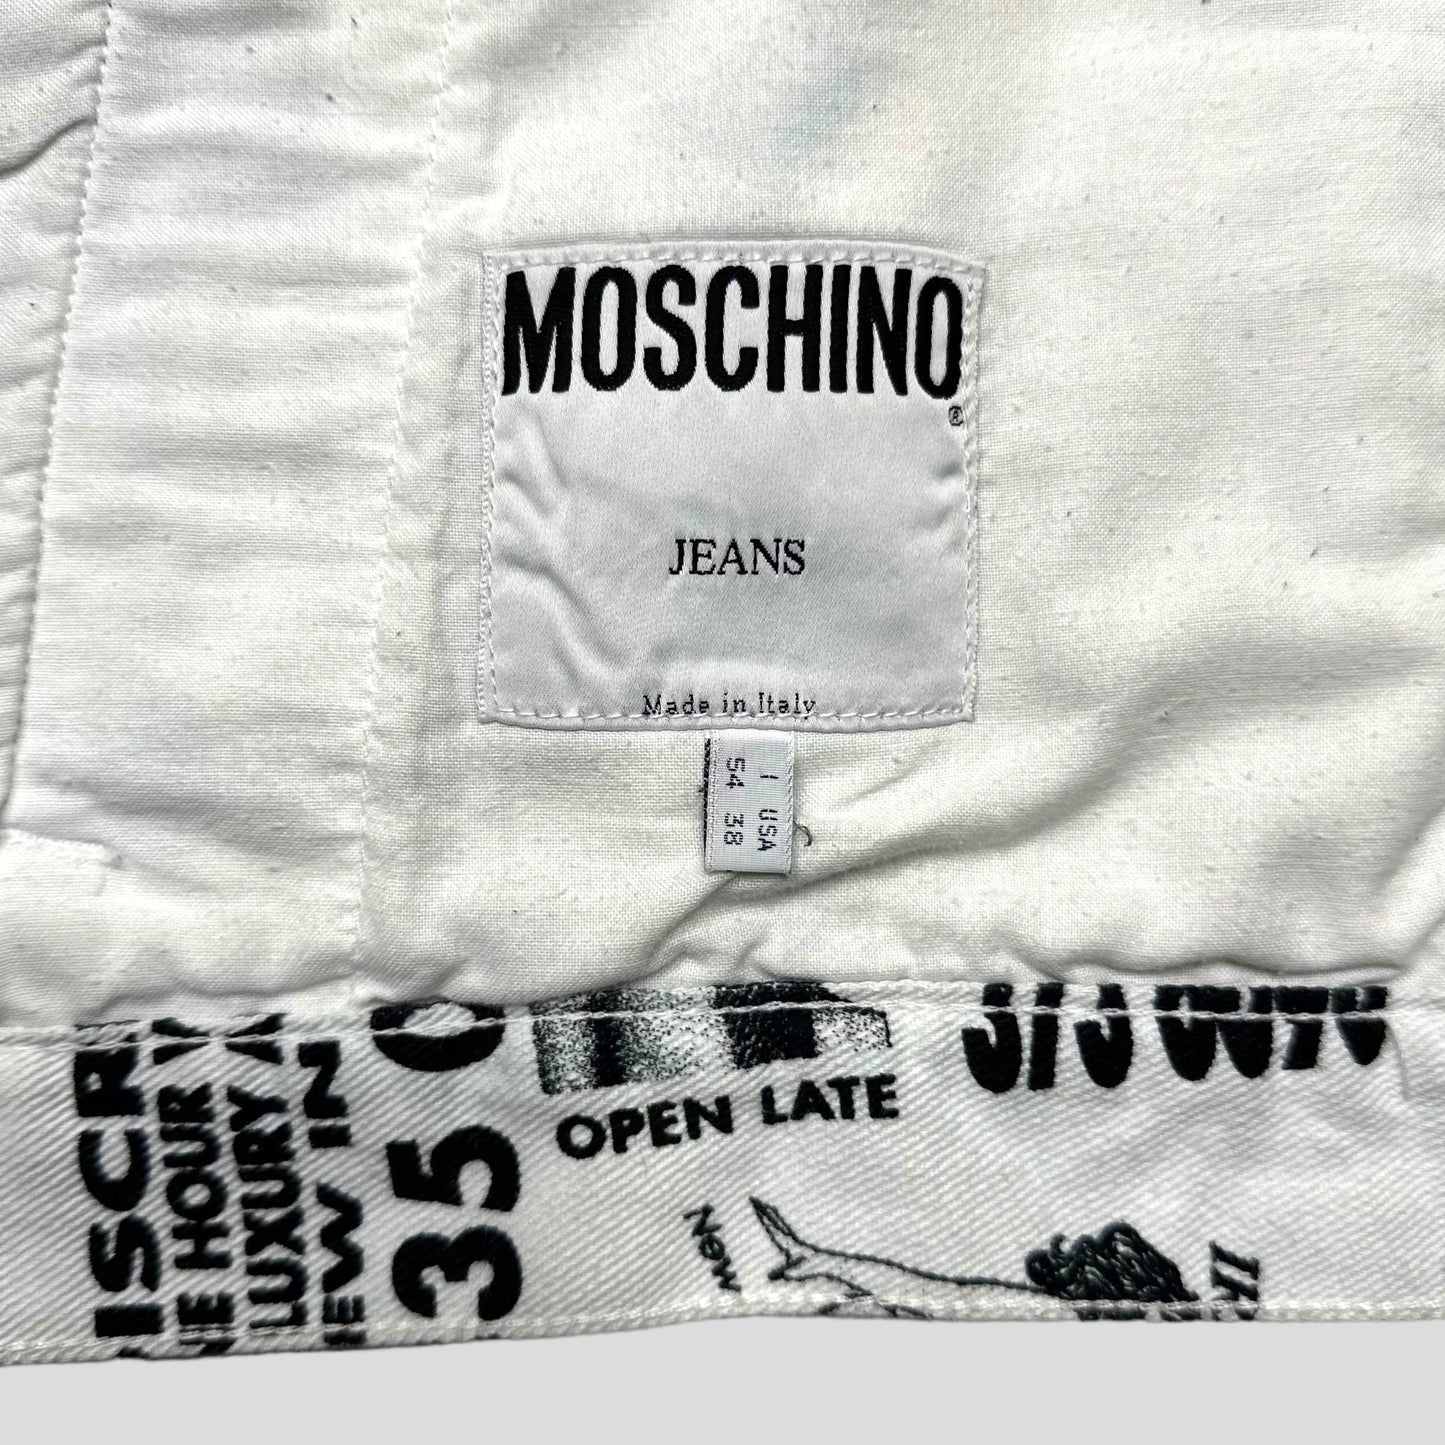 Moschino Jeans 1995 Safe Sex Jacket, Jeans & Hat Set - L/XL - Known Source